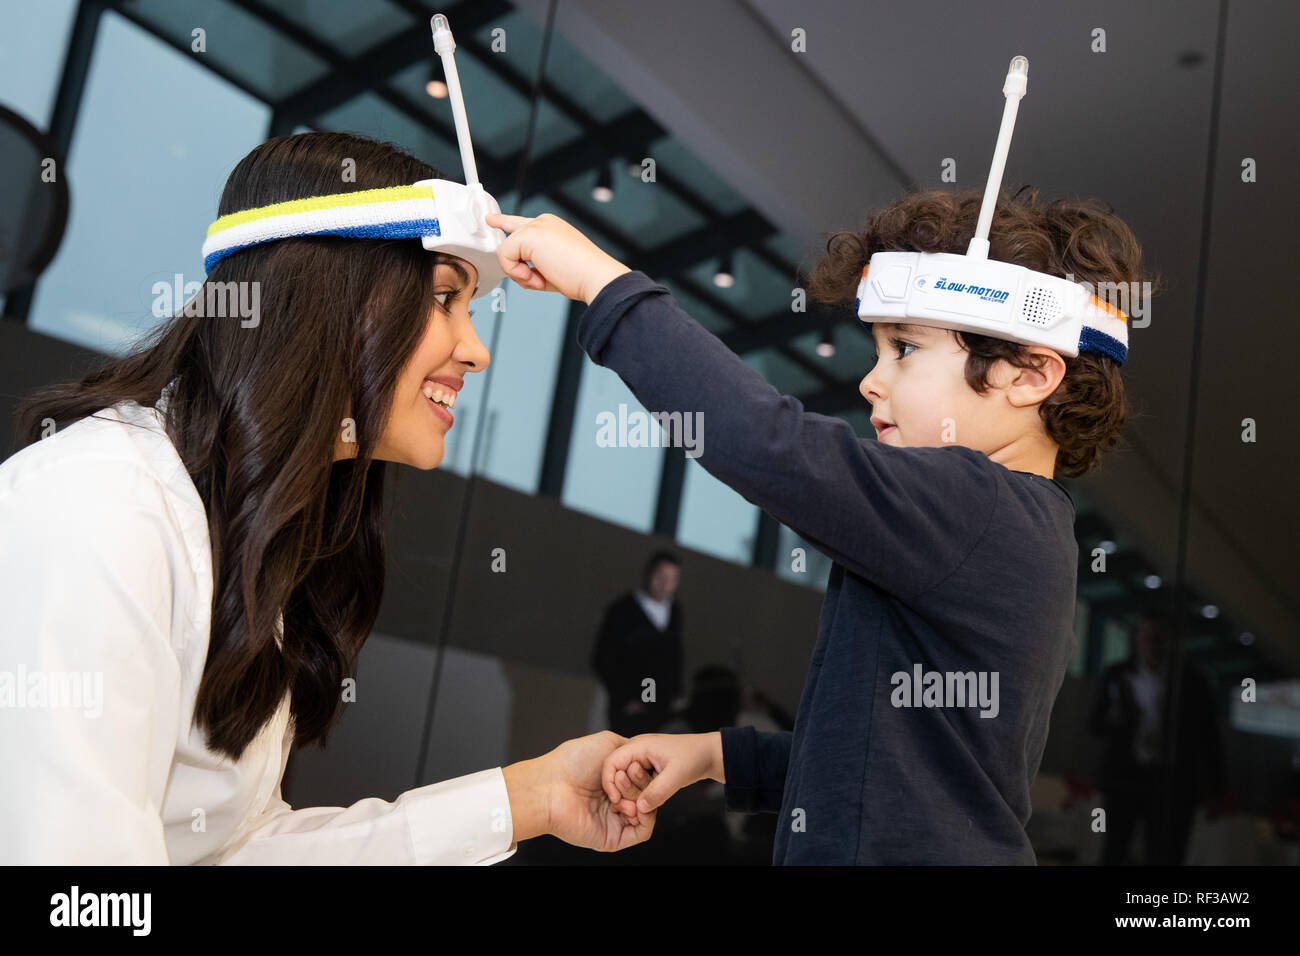 24 January 2019, Bavaria, Nürnberg: Model Jennifer and Kaan will play the 'Slow Motion Race Game' from Hasbro on the sidelines of the press conference for the International Toy Fair 2019 in the Exhibition Centre Nuremberg. A sensor on the antenna of a headband measures the speed of the player's movement - but the winner is not the fastest but the slowest. The toy is nominated in the category 'Schoolkids' for the 'Toy Award'. The world's largest toy fair takes place this year from 30 January to 03 February 2019. Photo: Daniel Karmann/dpa Stock Photo